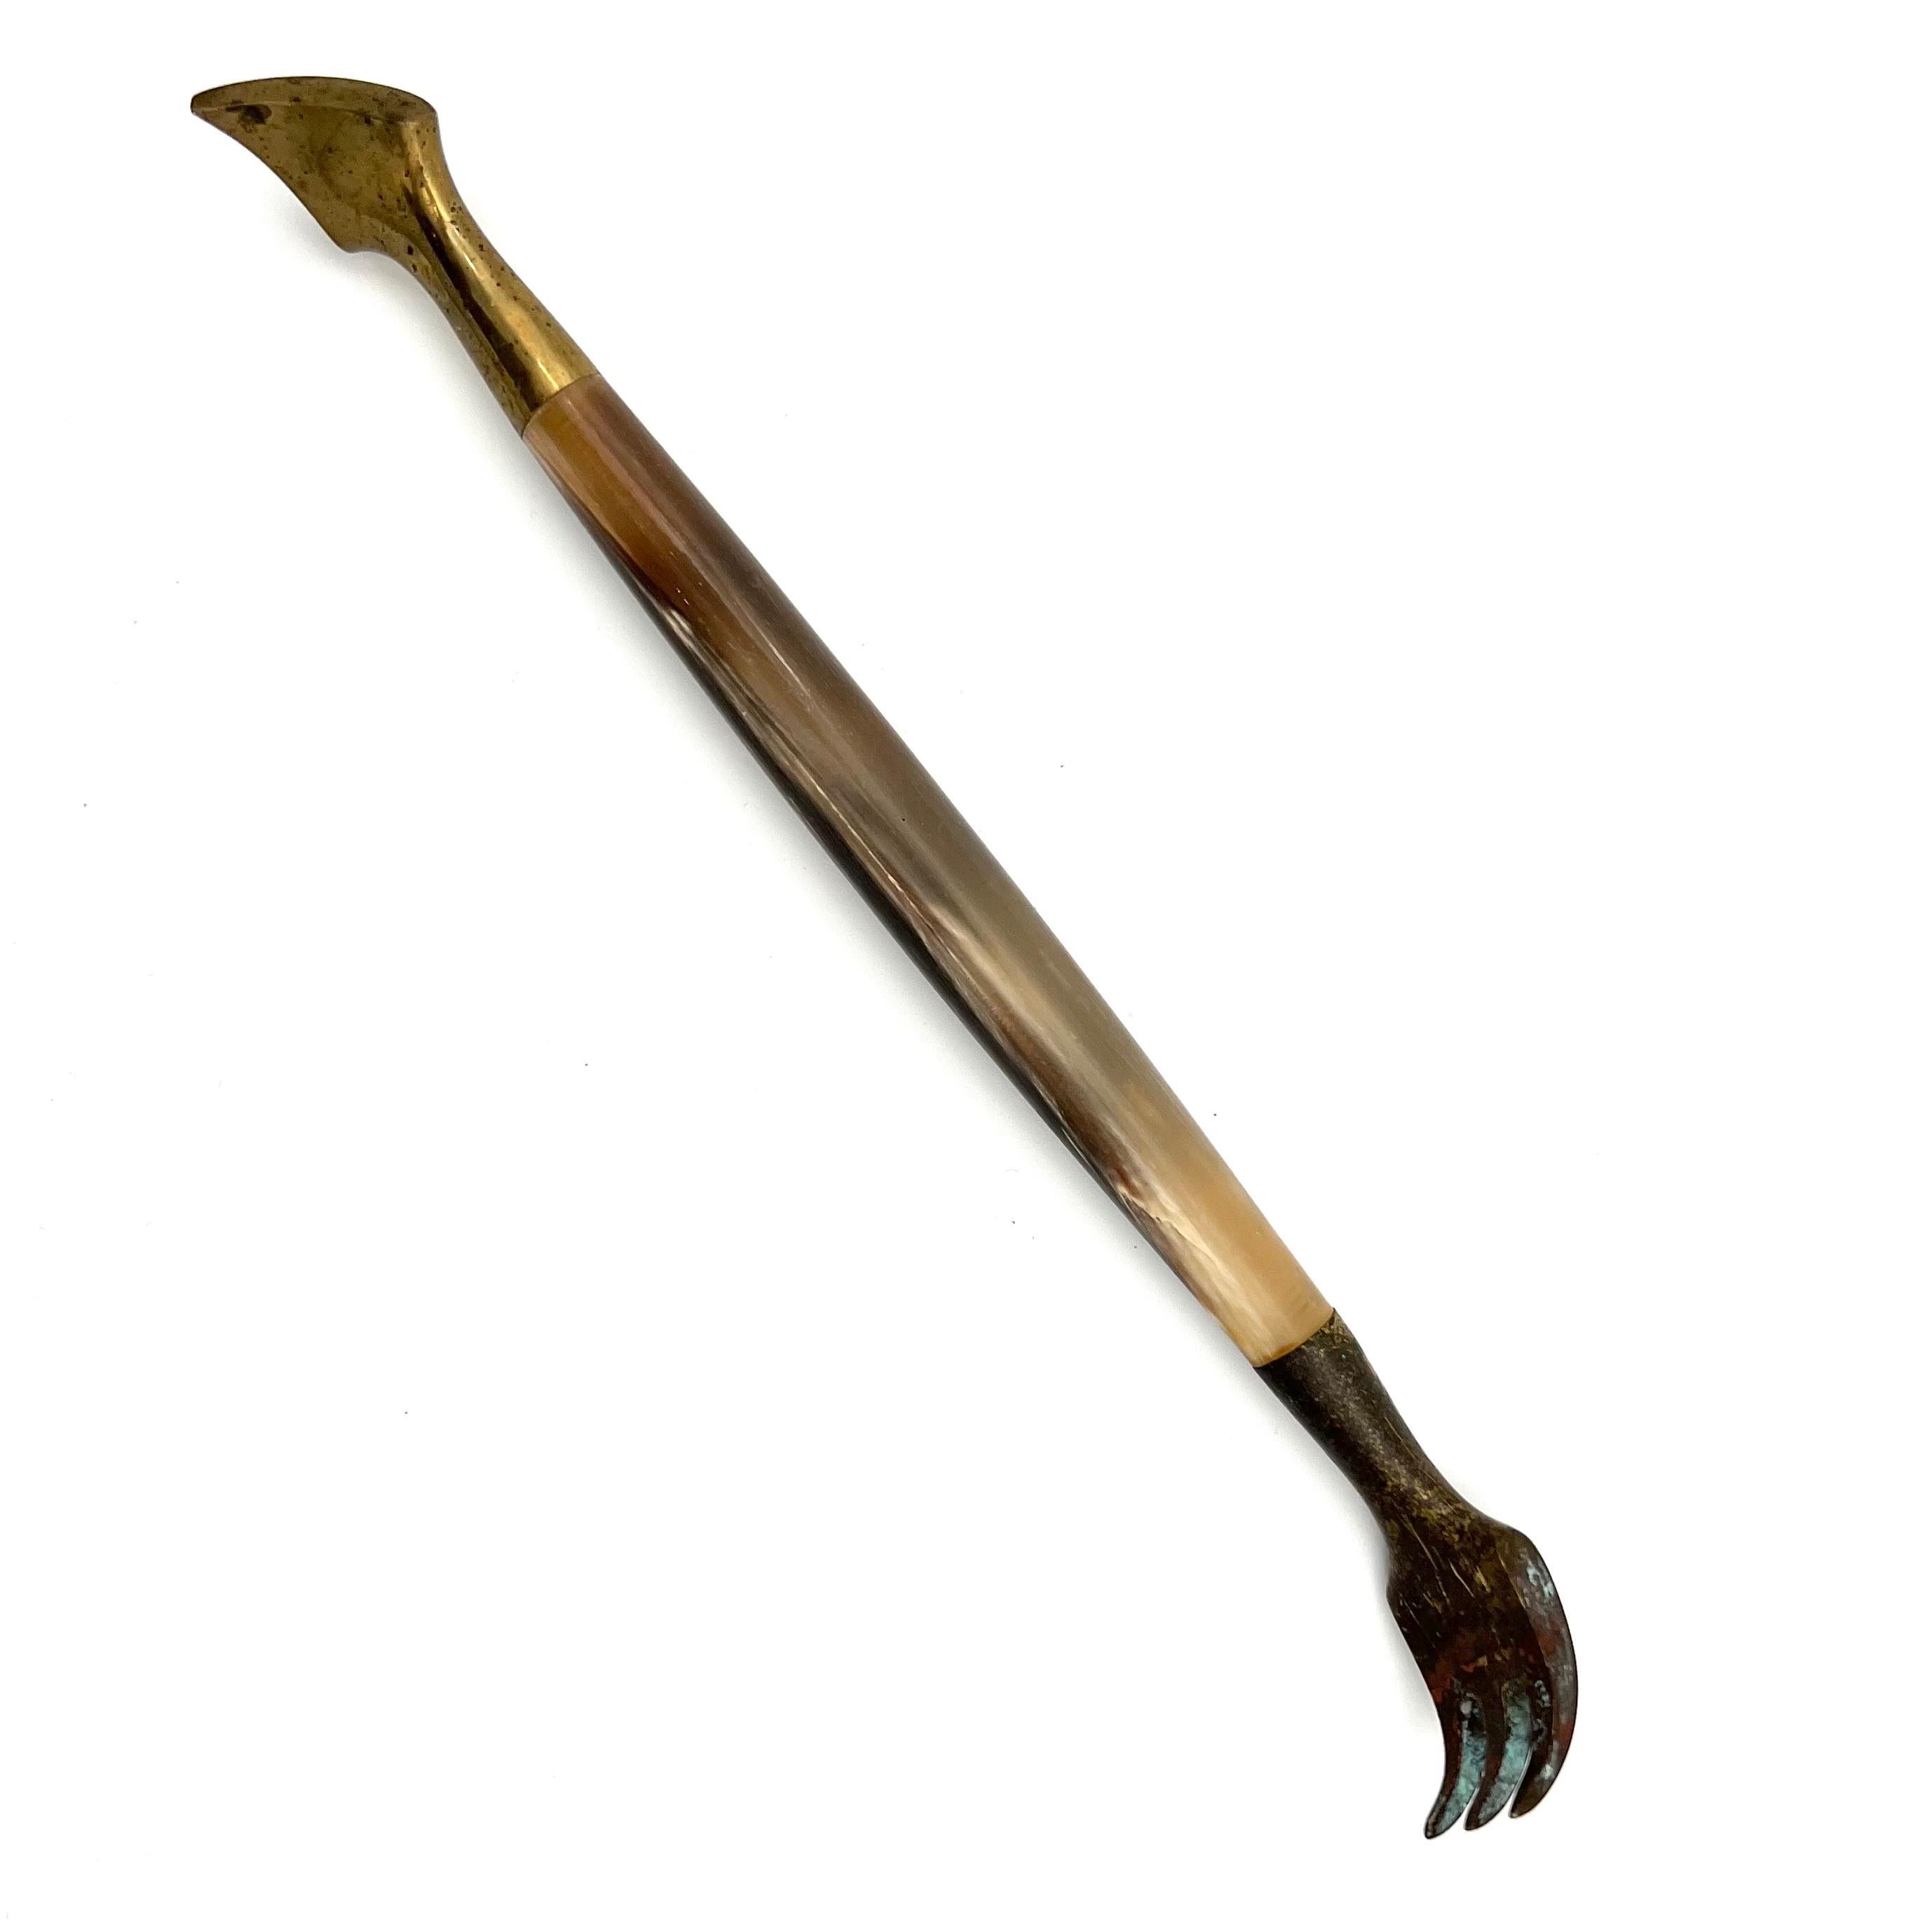 Brass and horn cactus gardening tool by Auböck, designed in the 1950s.
The end of the tool is made of solid brass on both sides, the handle in the middle is made of horn.

Oxidation/ brassing on the fork.
Total length: 21 cm.